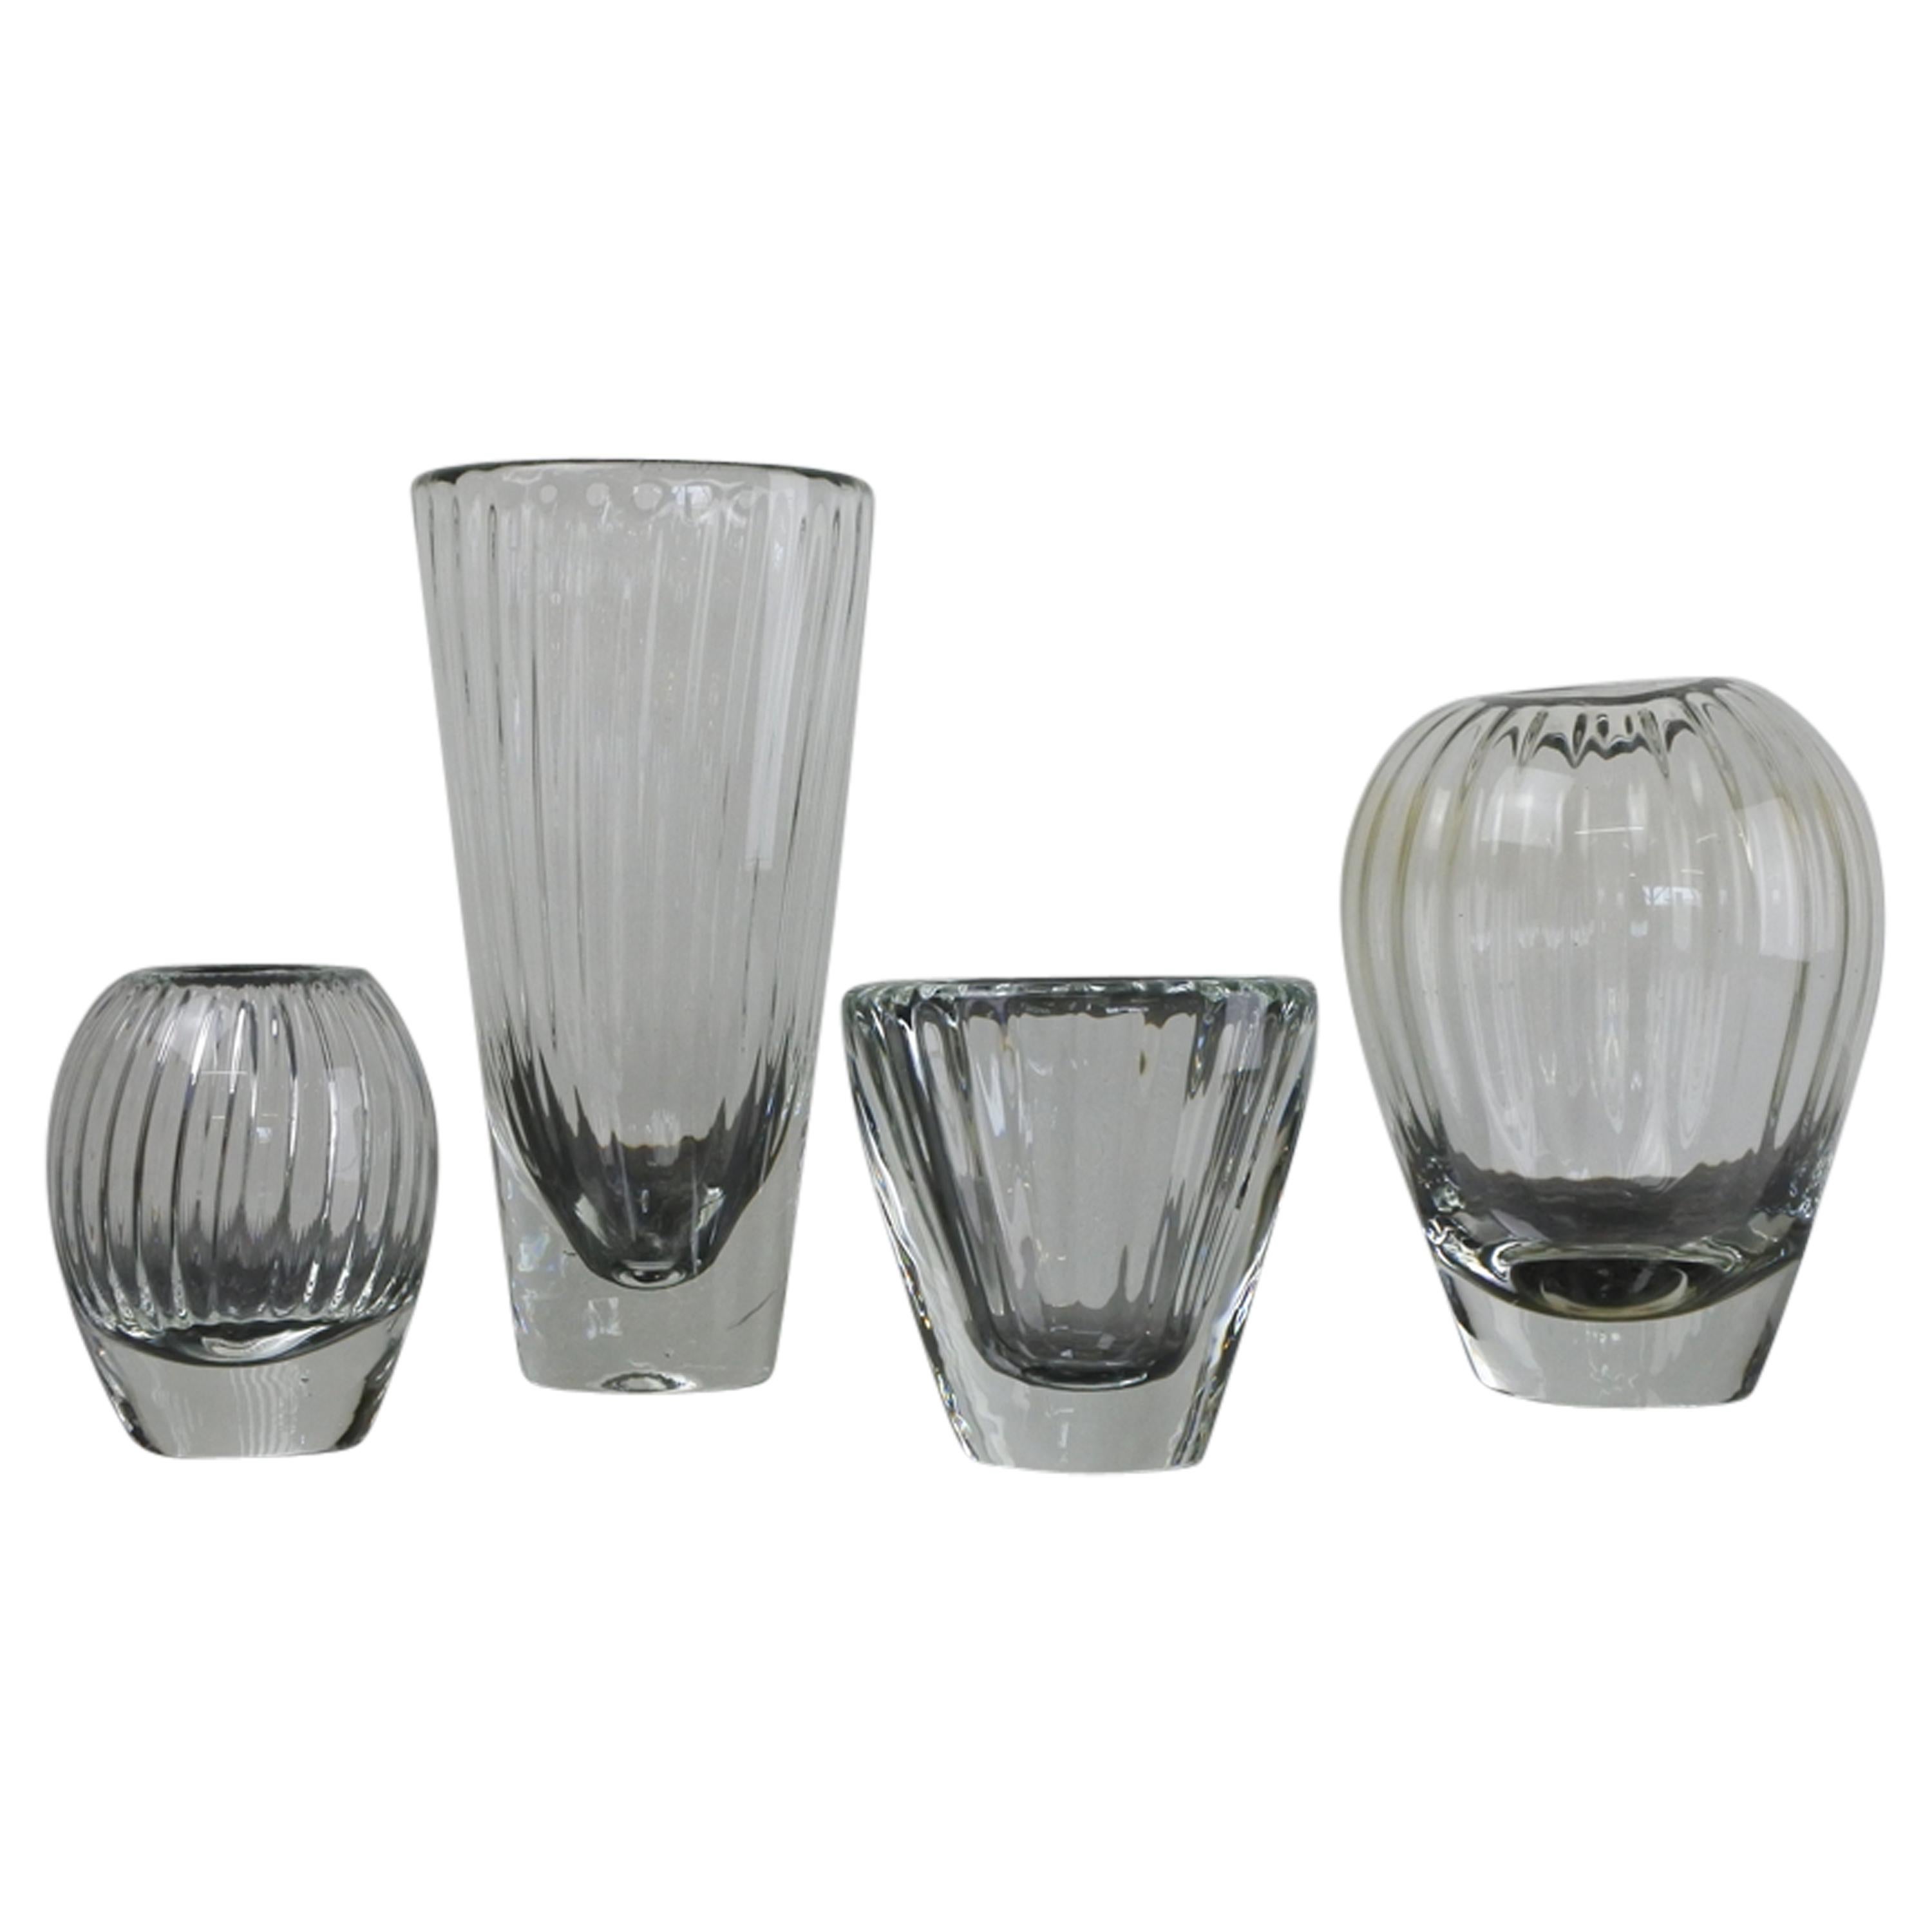 Set of Four Blown Art Glass Vases by Iittala, Finland, 1959